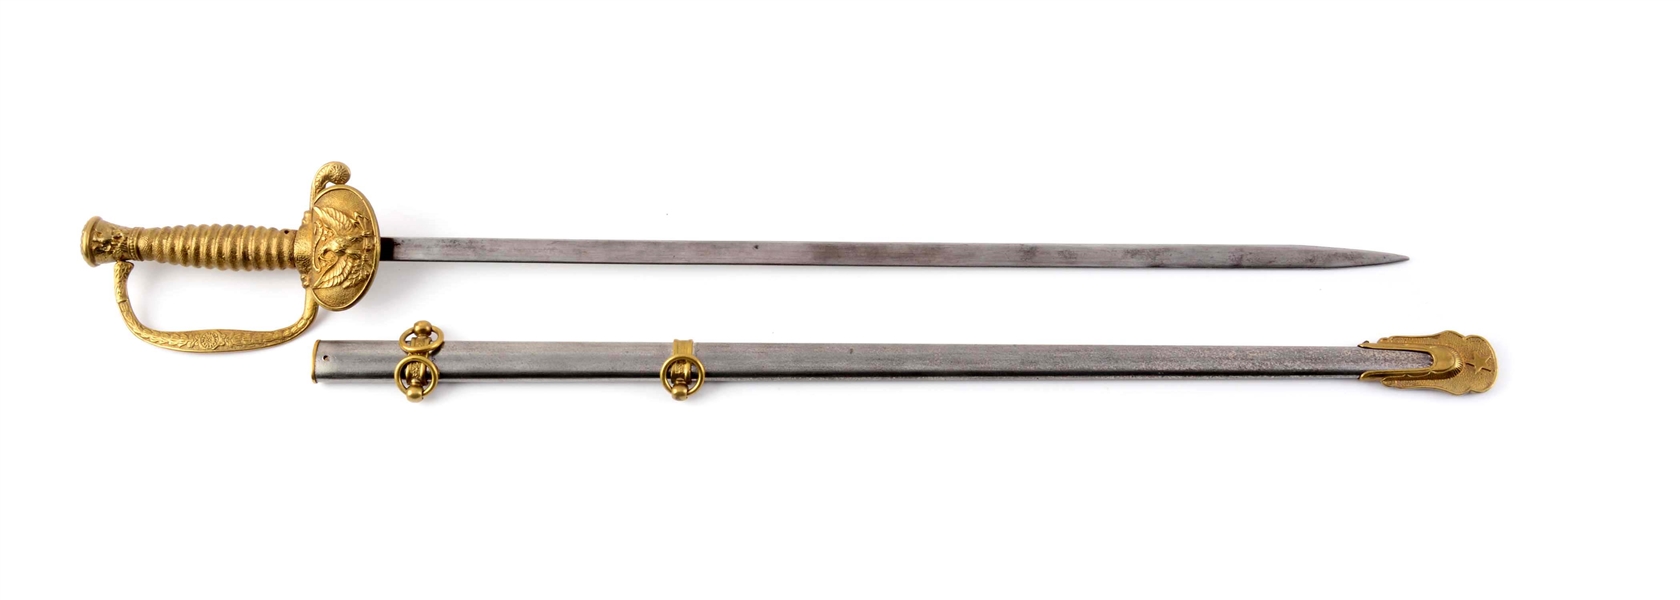 U.S. OFFICERS MODEL STAFF SWORD CHILDS VERSION WITH PHOTO.